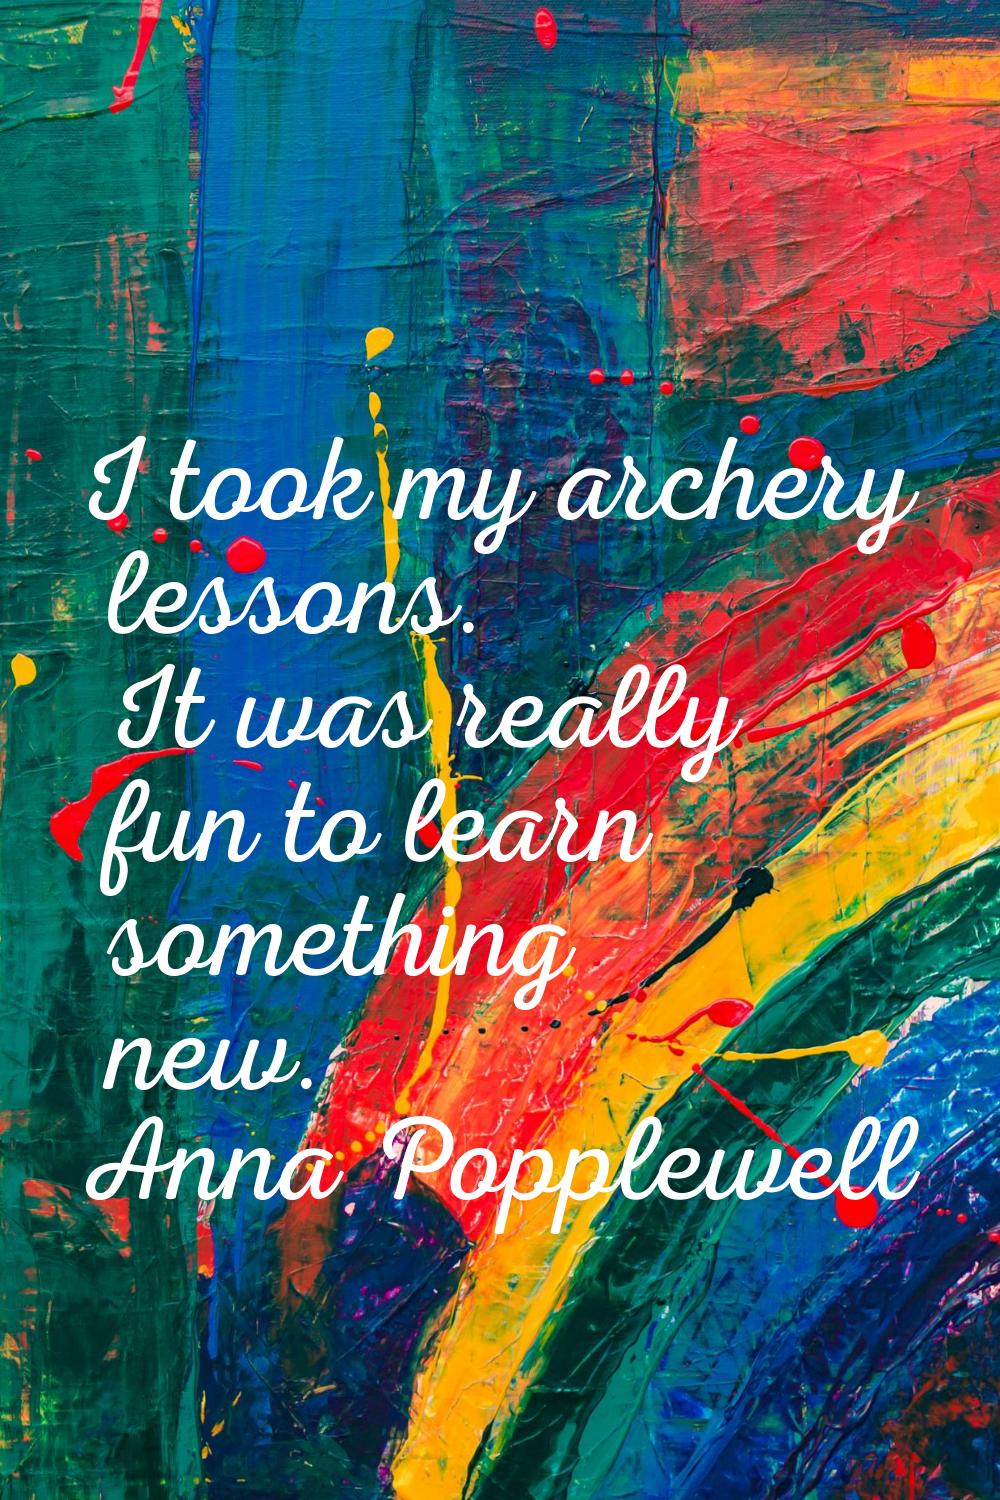 I took my archery lessons. It was really fun to learn something new.